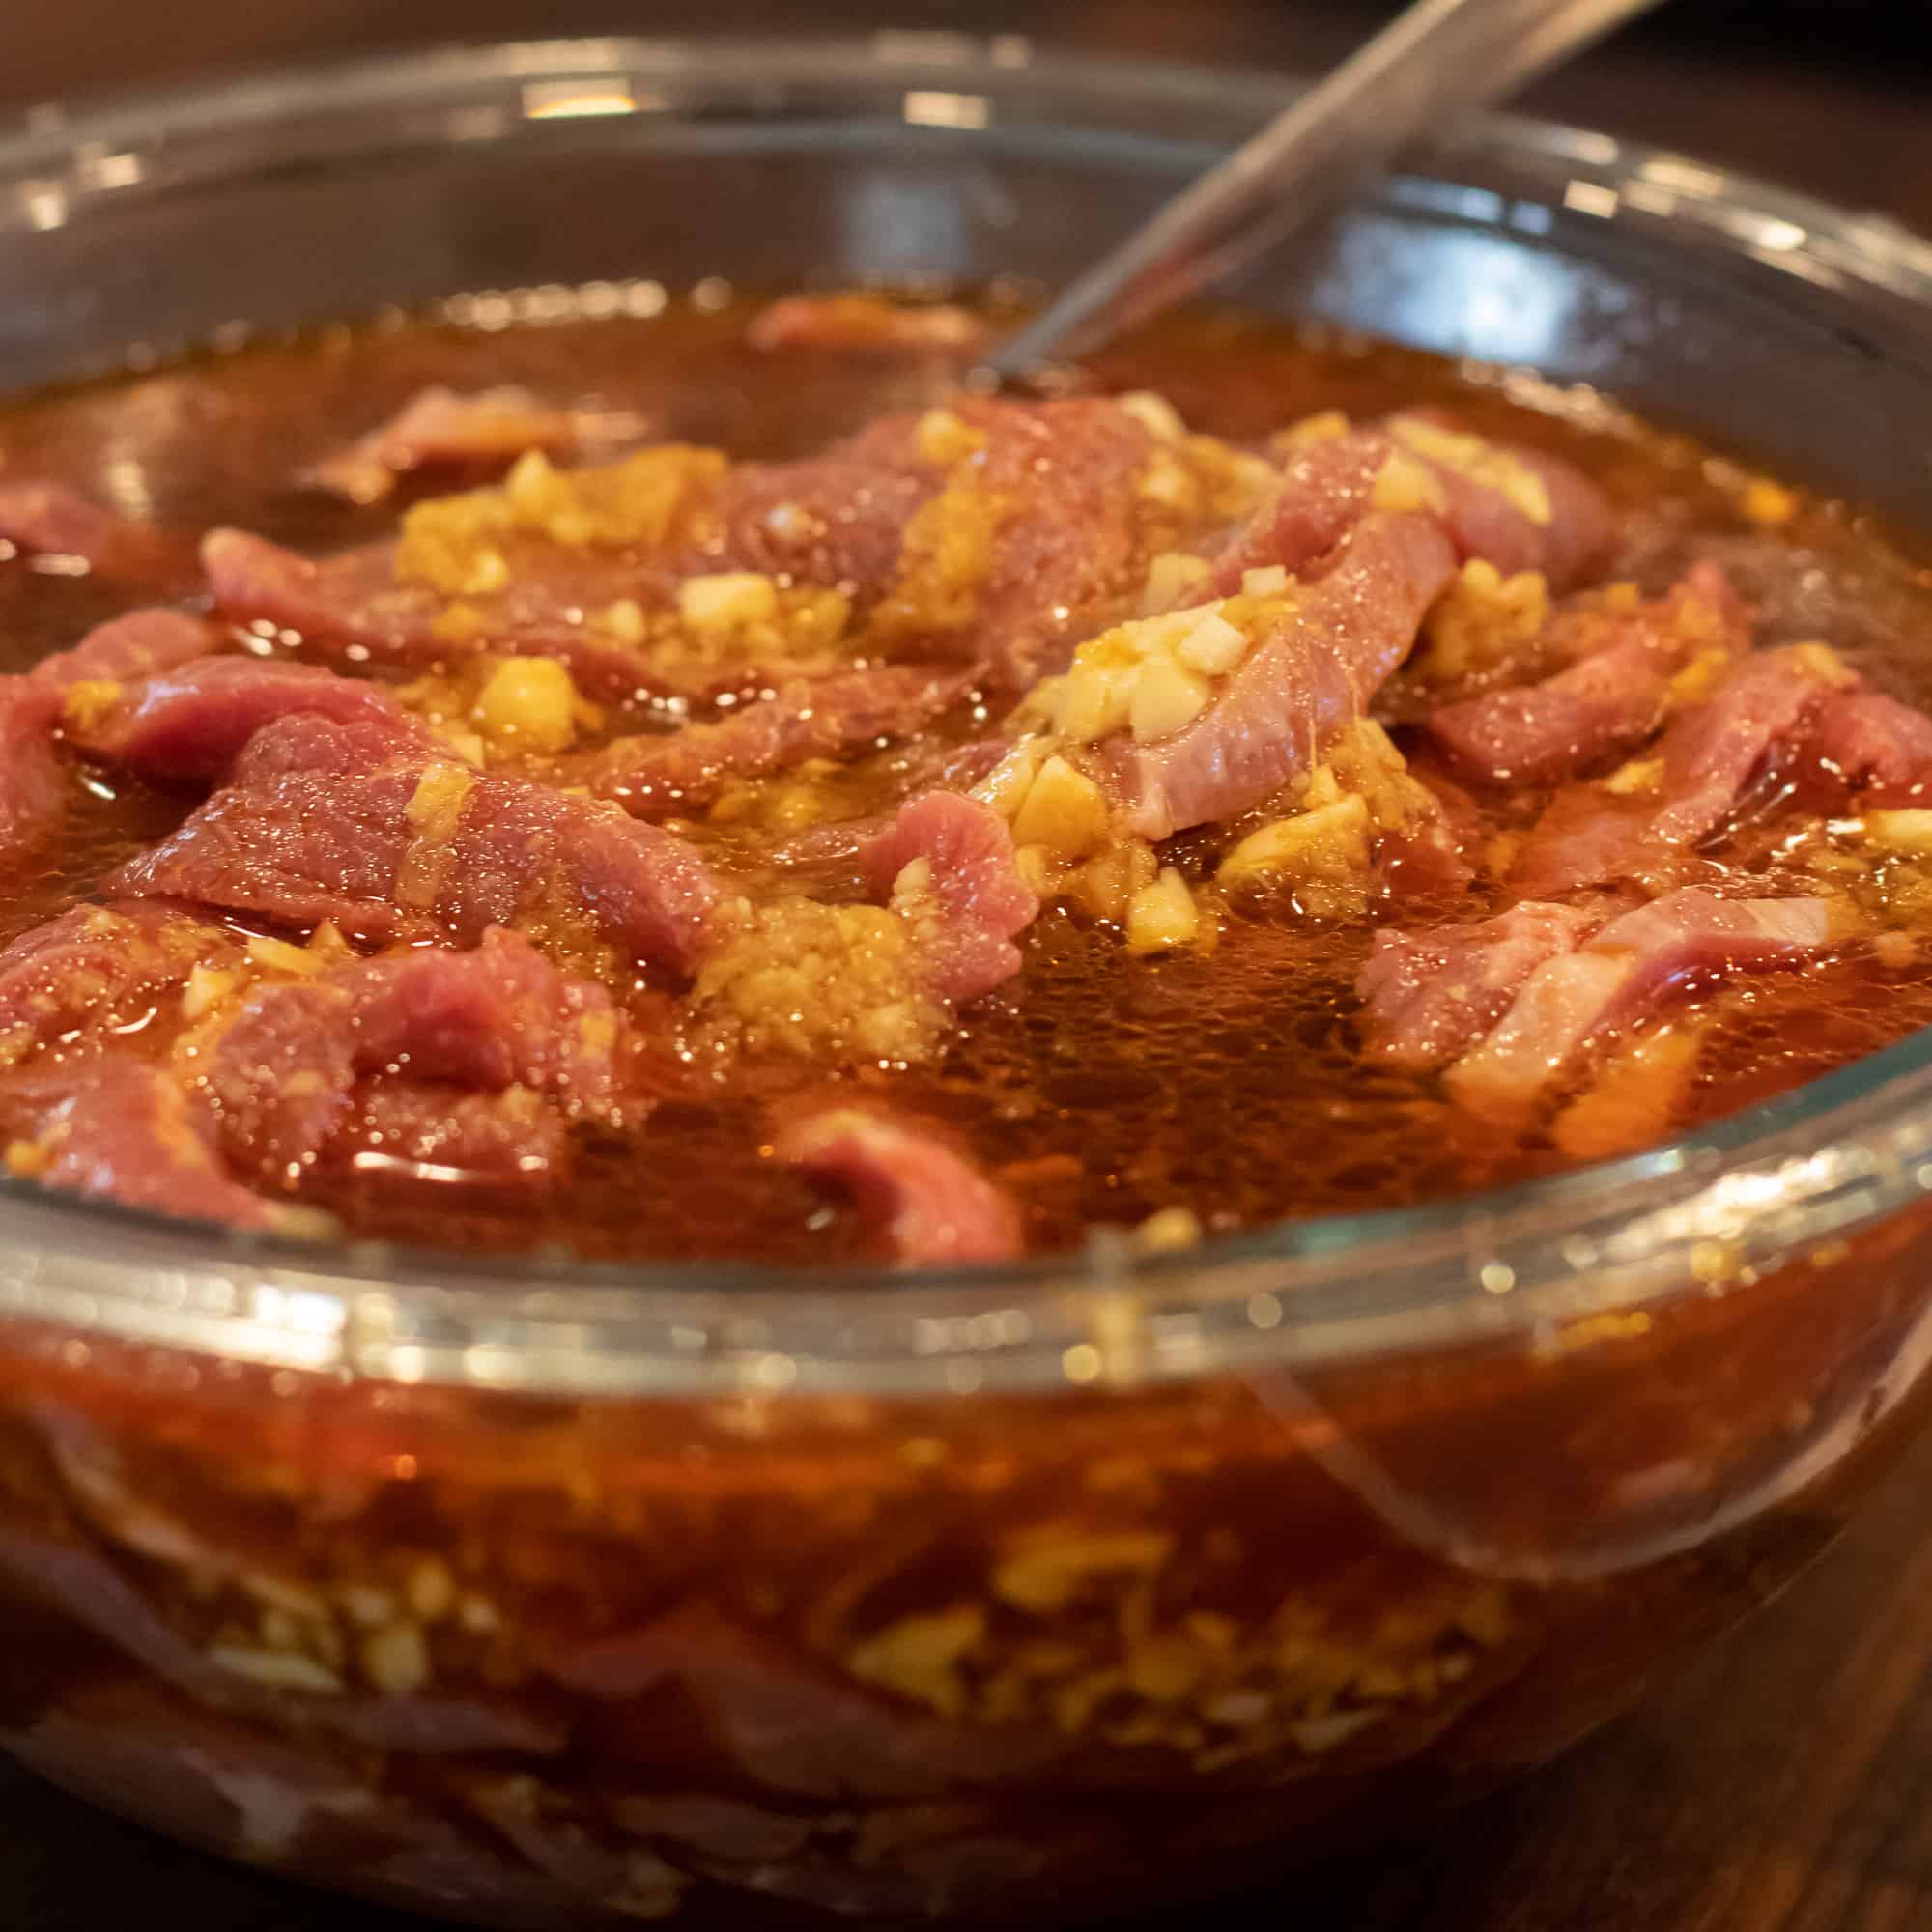 Let the meat marinate in a bowl in the fridge.